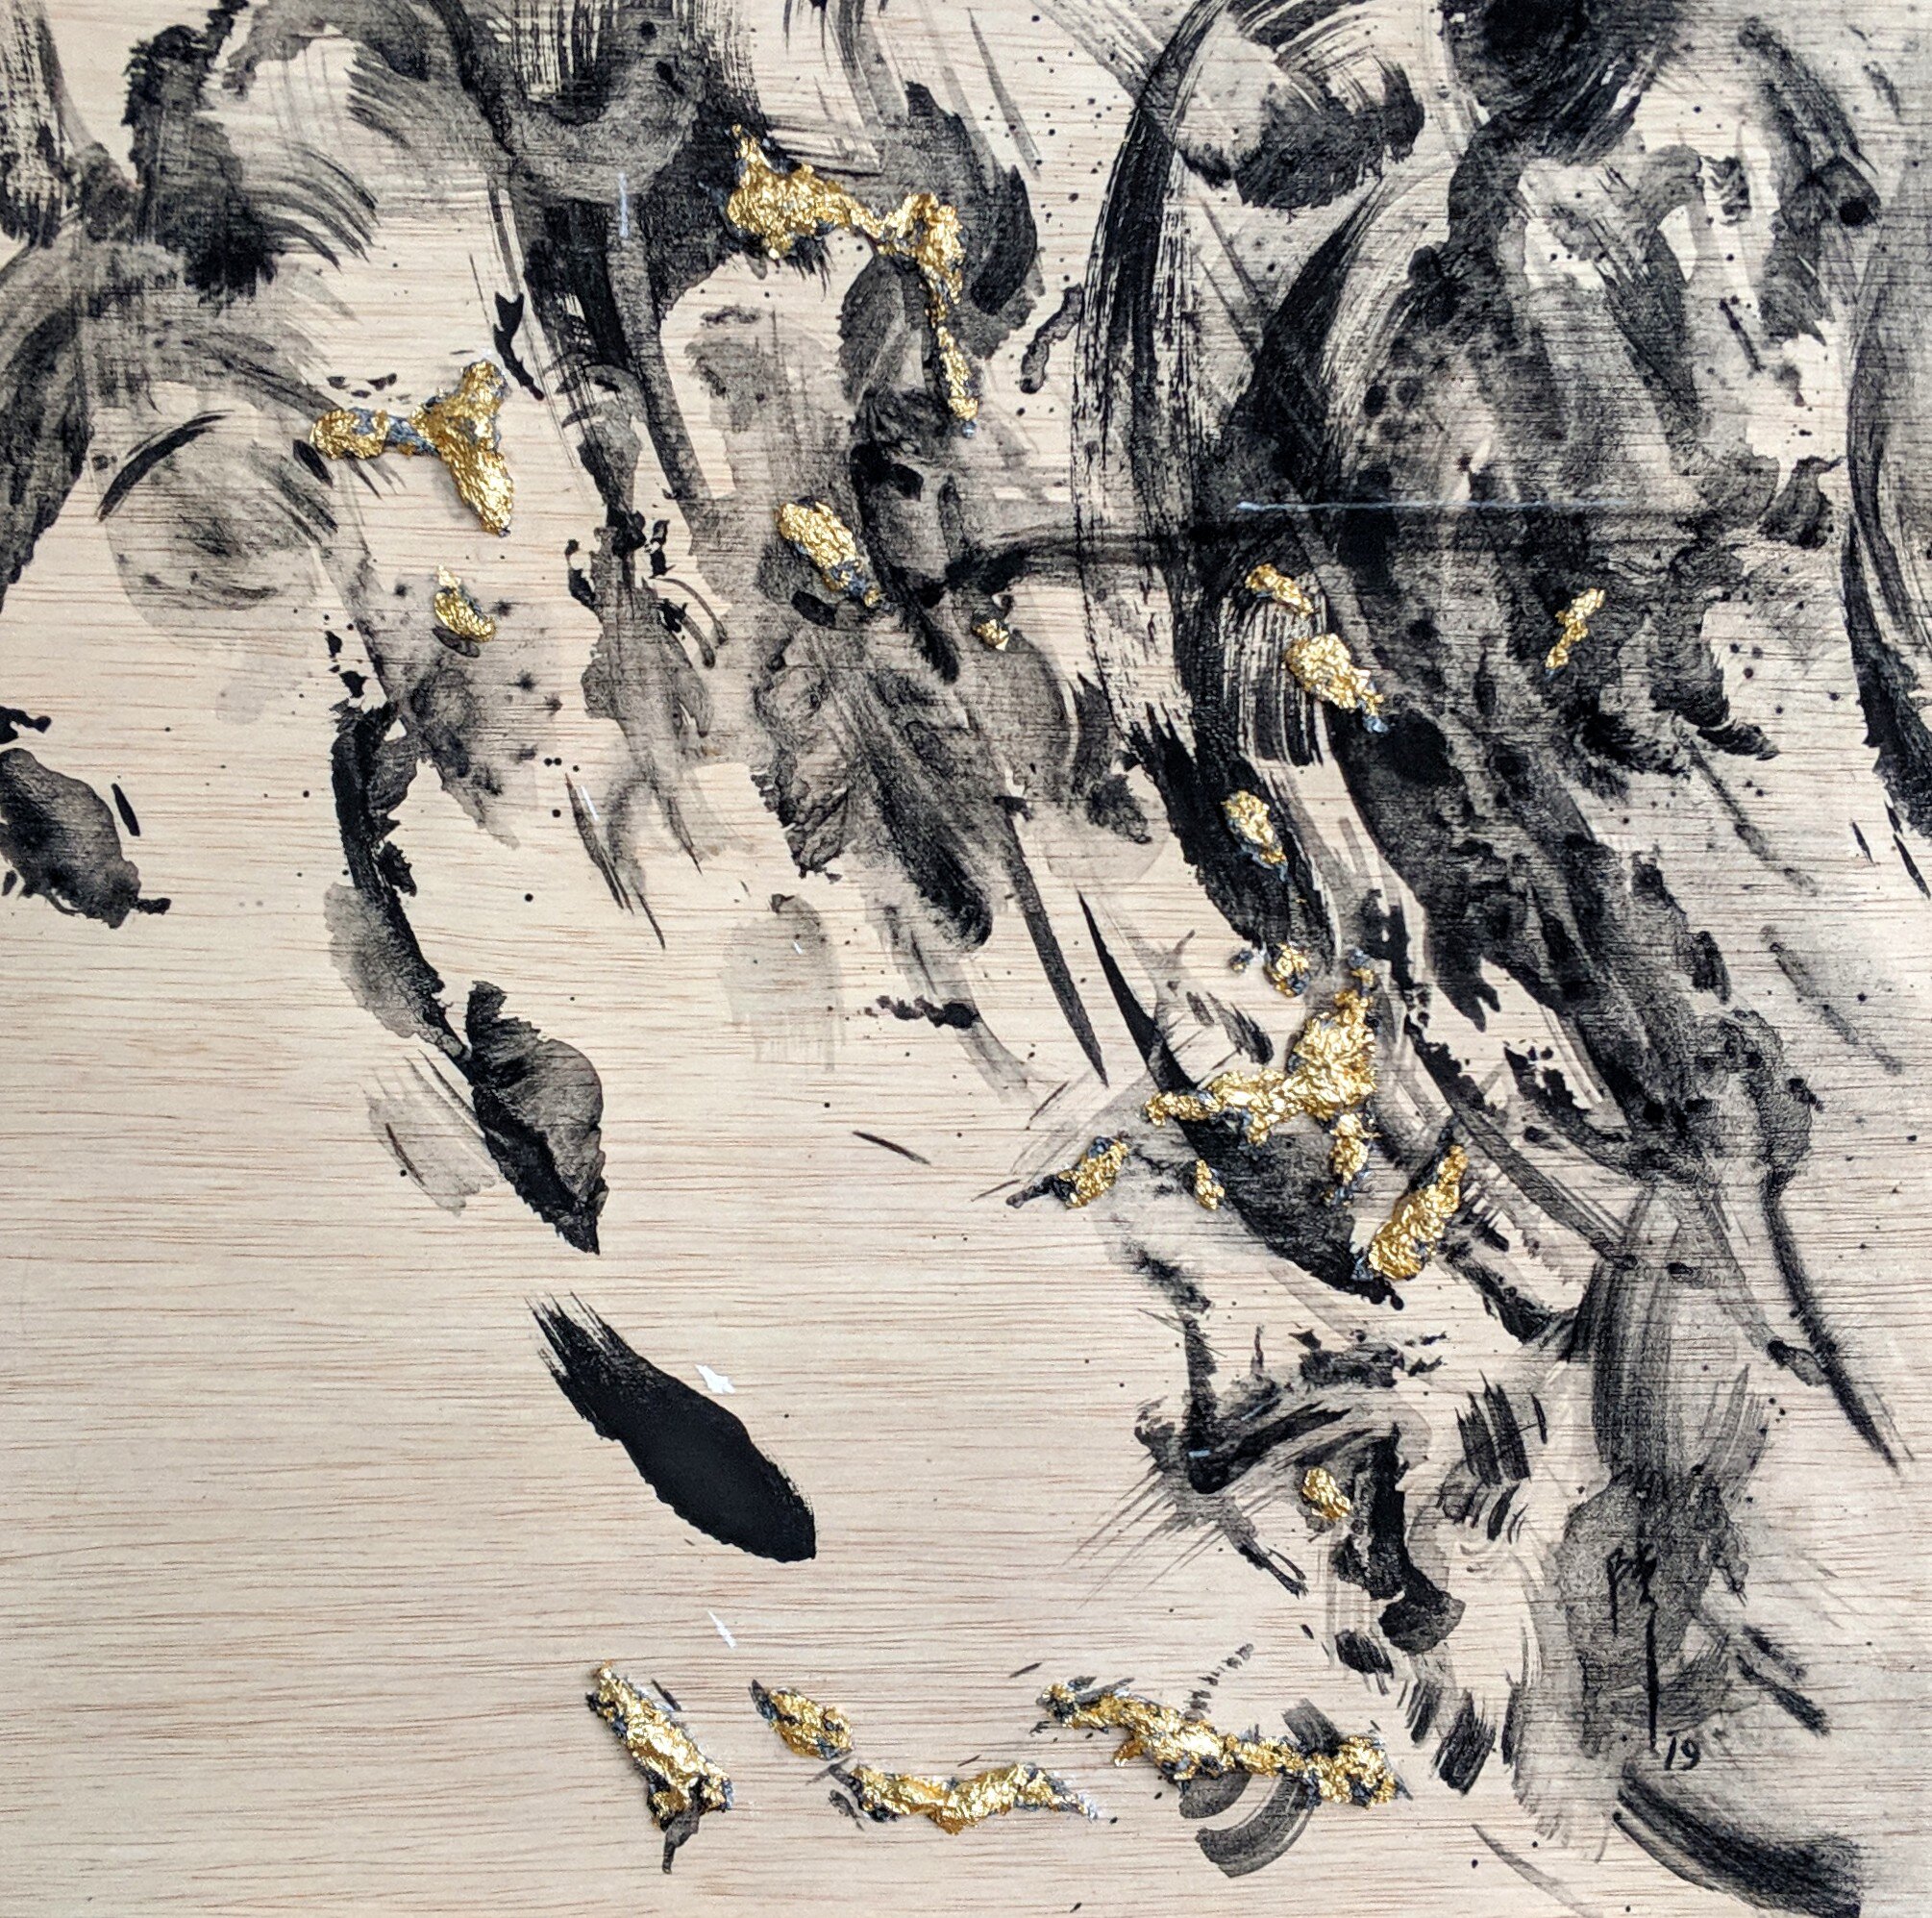   Skin Stories  2019     Charcoal, white chalk, gold leaf and primer on wood 